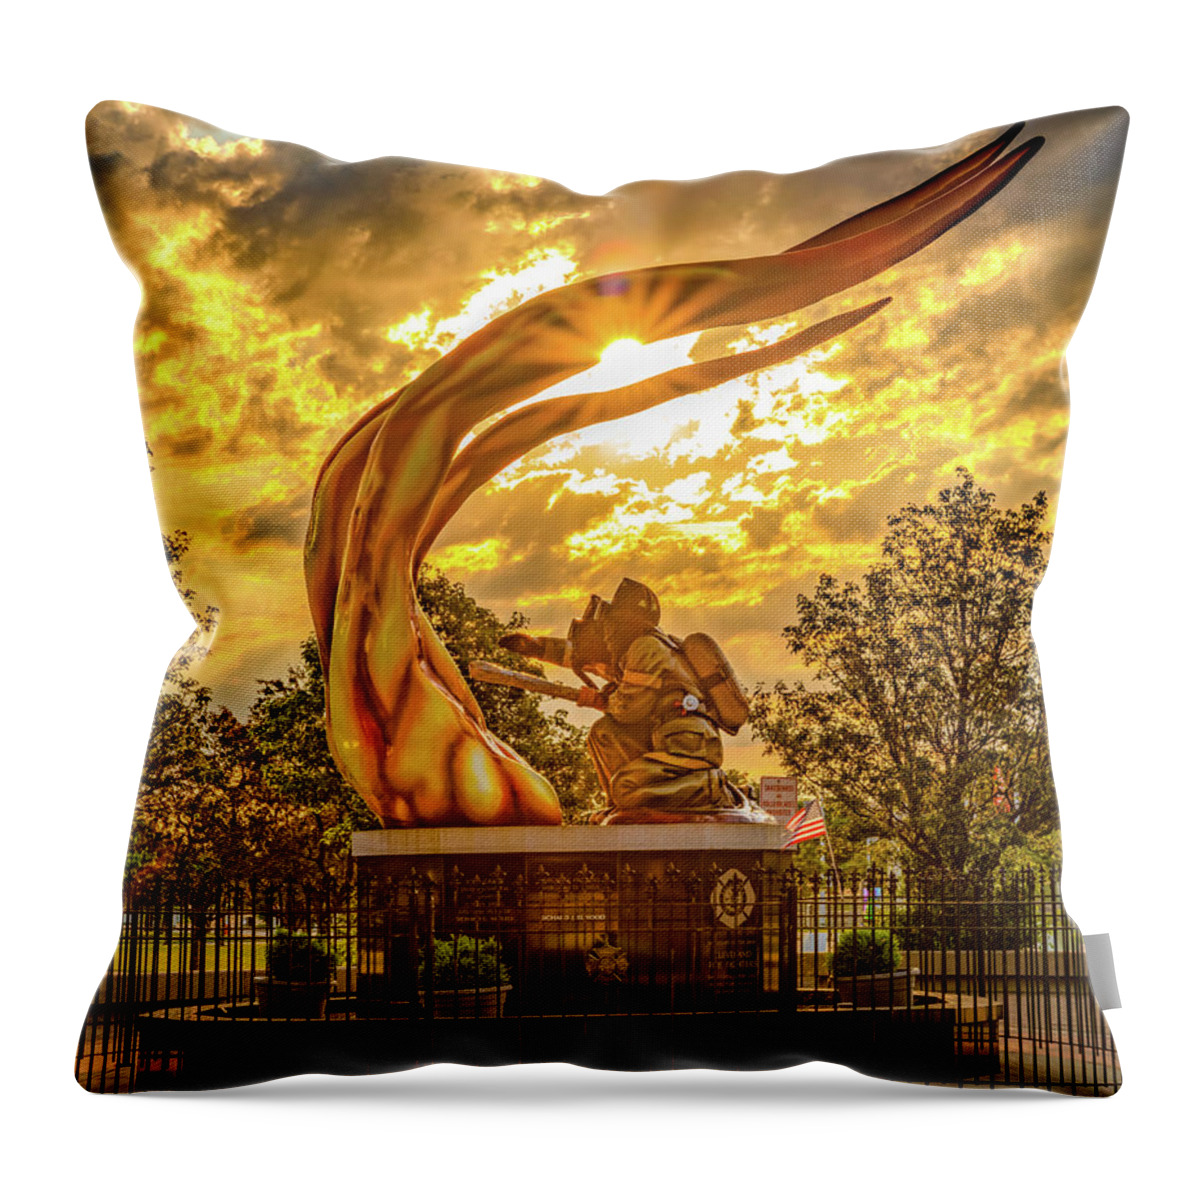 Cleveland Ohio Throw Pillow featuring the photograph Burning Sunrise At The Cleveland Fire Fighters Memorial by Gregory Ballos